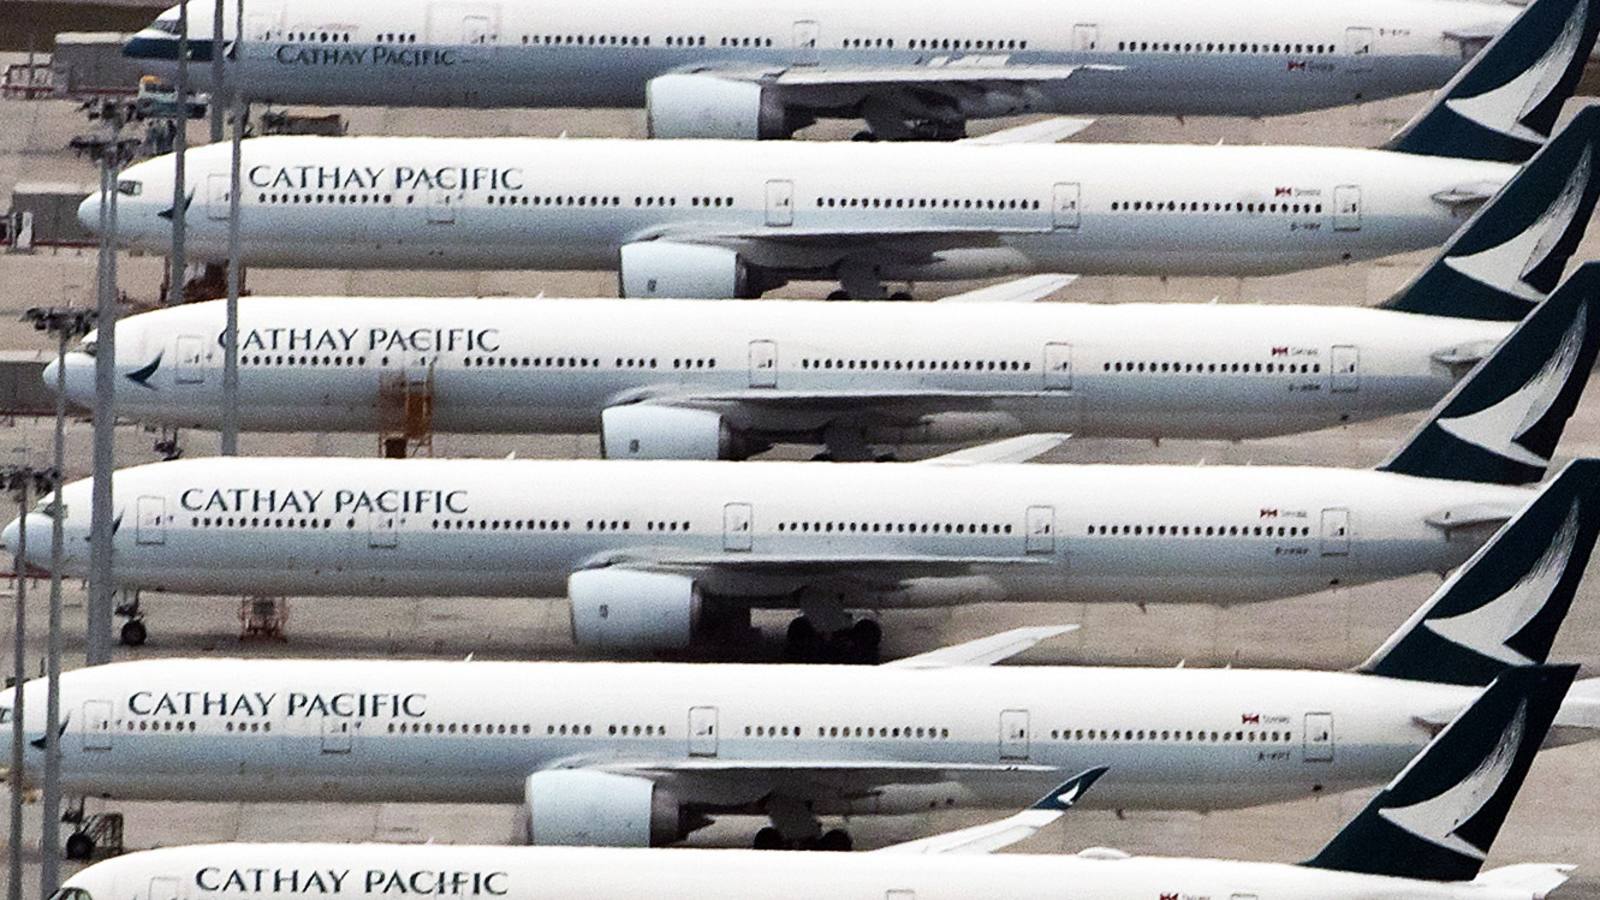 Cathay Pacific sees 'incredibly challenging year' from coronavirus